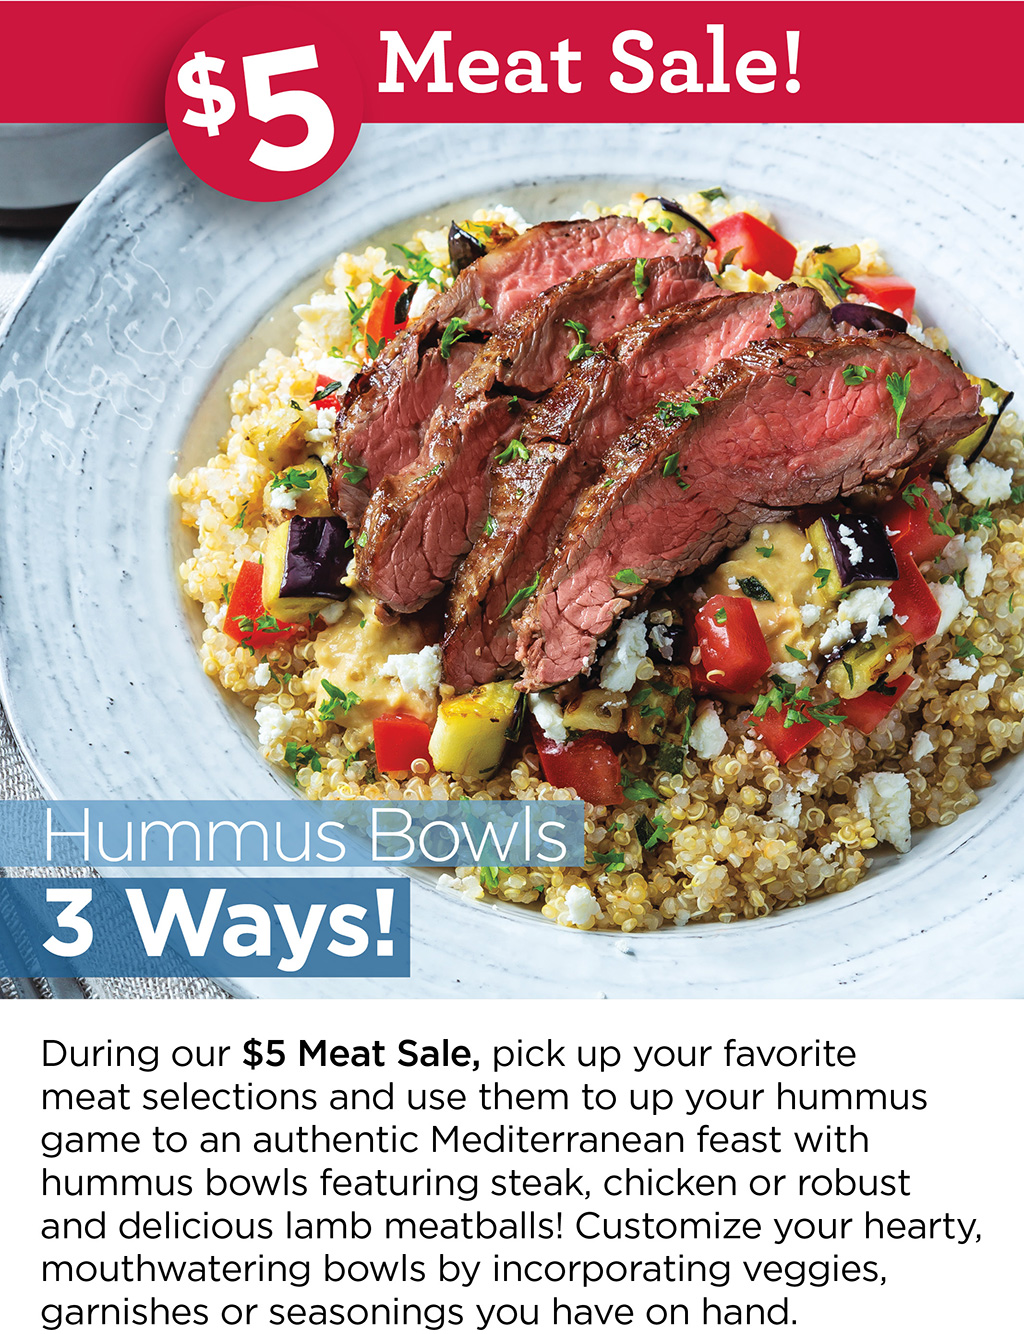 Hummus Bowls 3 Ways! - During our $5 Meat Sale, pick up your favorite meat selections and use them to up your hummus game to an authentic Mediterranean feast with hummus bowls featuring steak, chicken or robust and delicious lamb meatballs! Customize your hearty, mouthwatering bowls by incorporating veggies, garnishes or seasonings you have on hand.